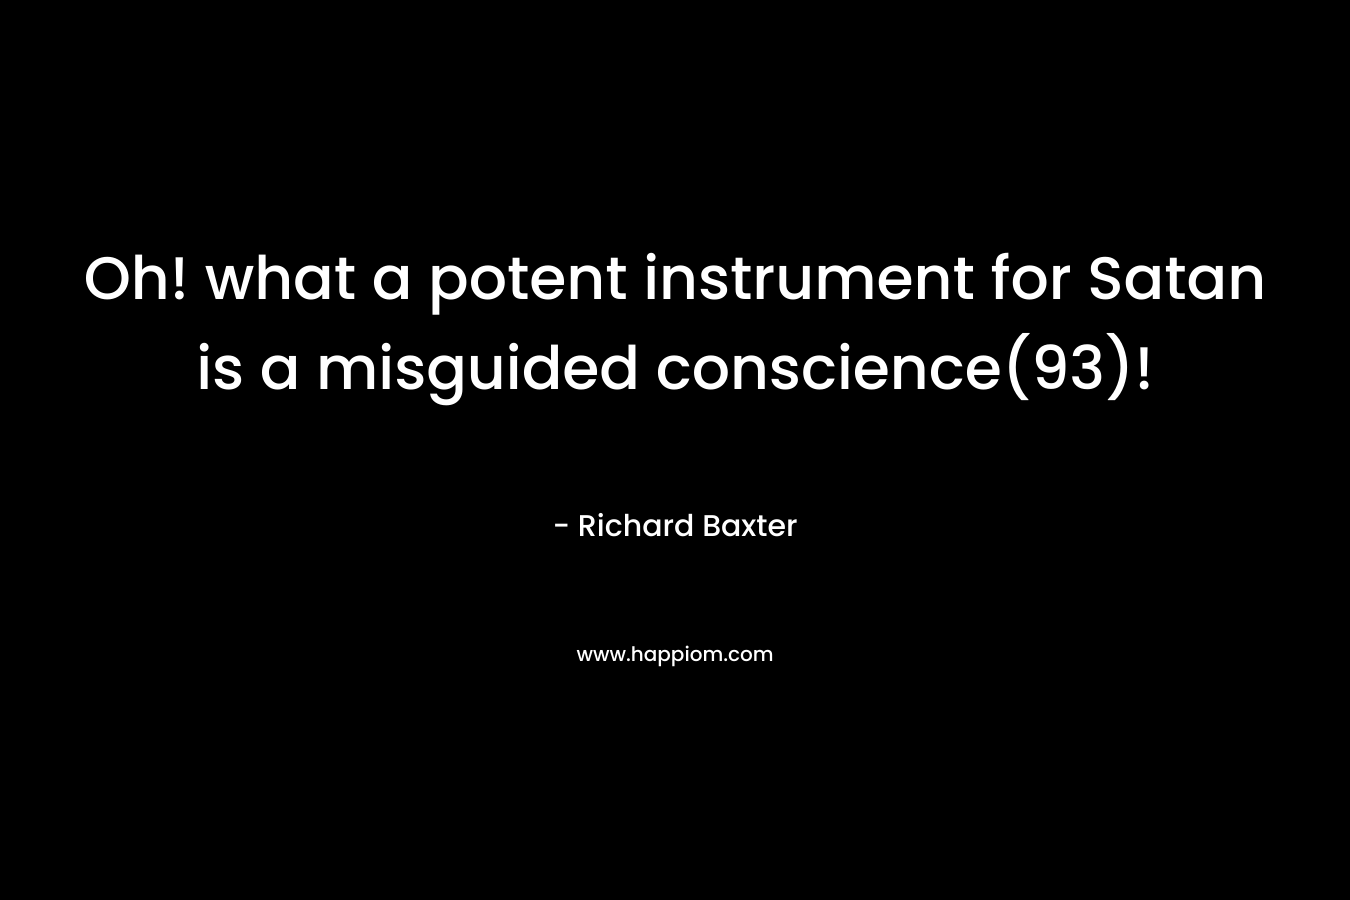 Oh! what a potent instrument for Satan is a misguided conscience(93)! – Richard Baxter